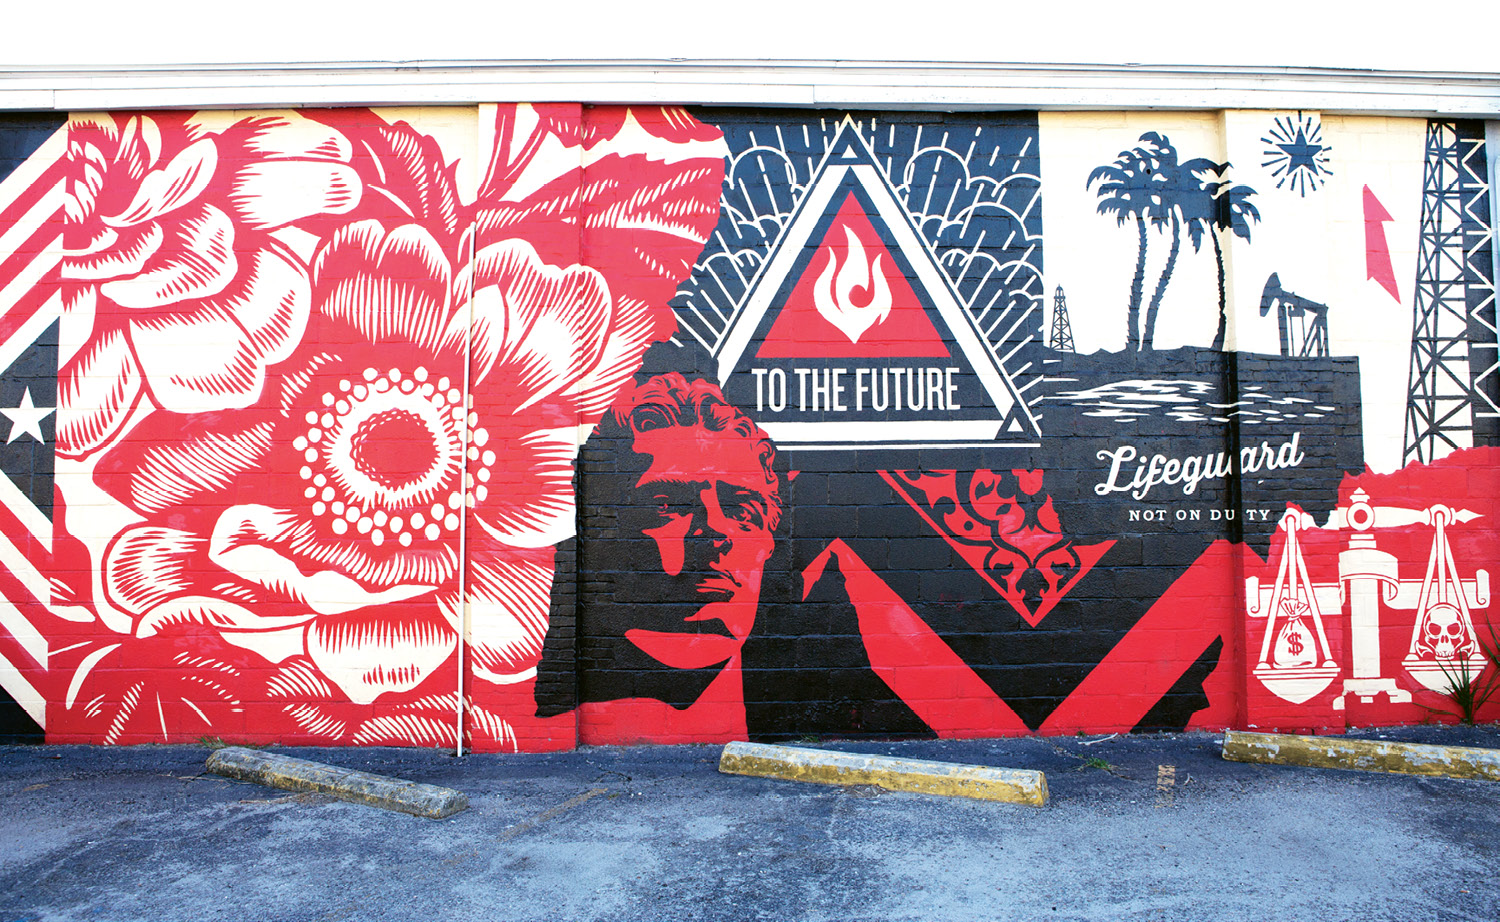 Power &amp; Glory  by Shepard Fairey  May 2014 - Across the driveway from The Daily and High Wire Distilling Co. (656 King St.)